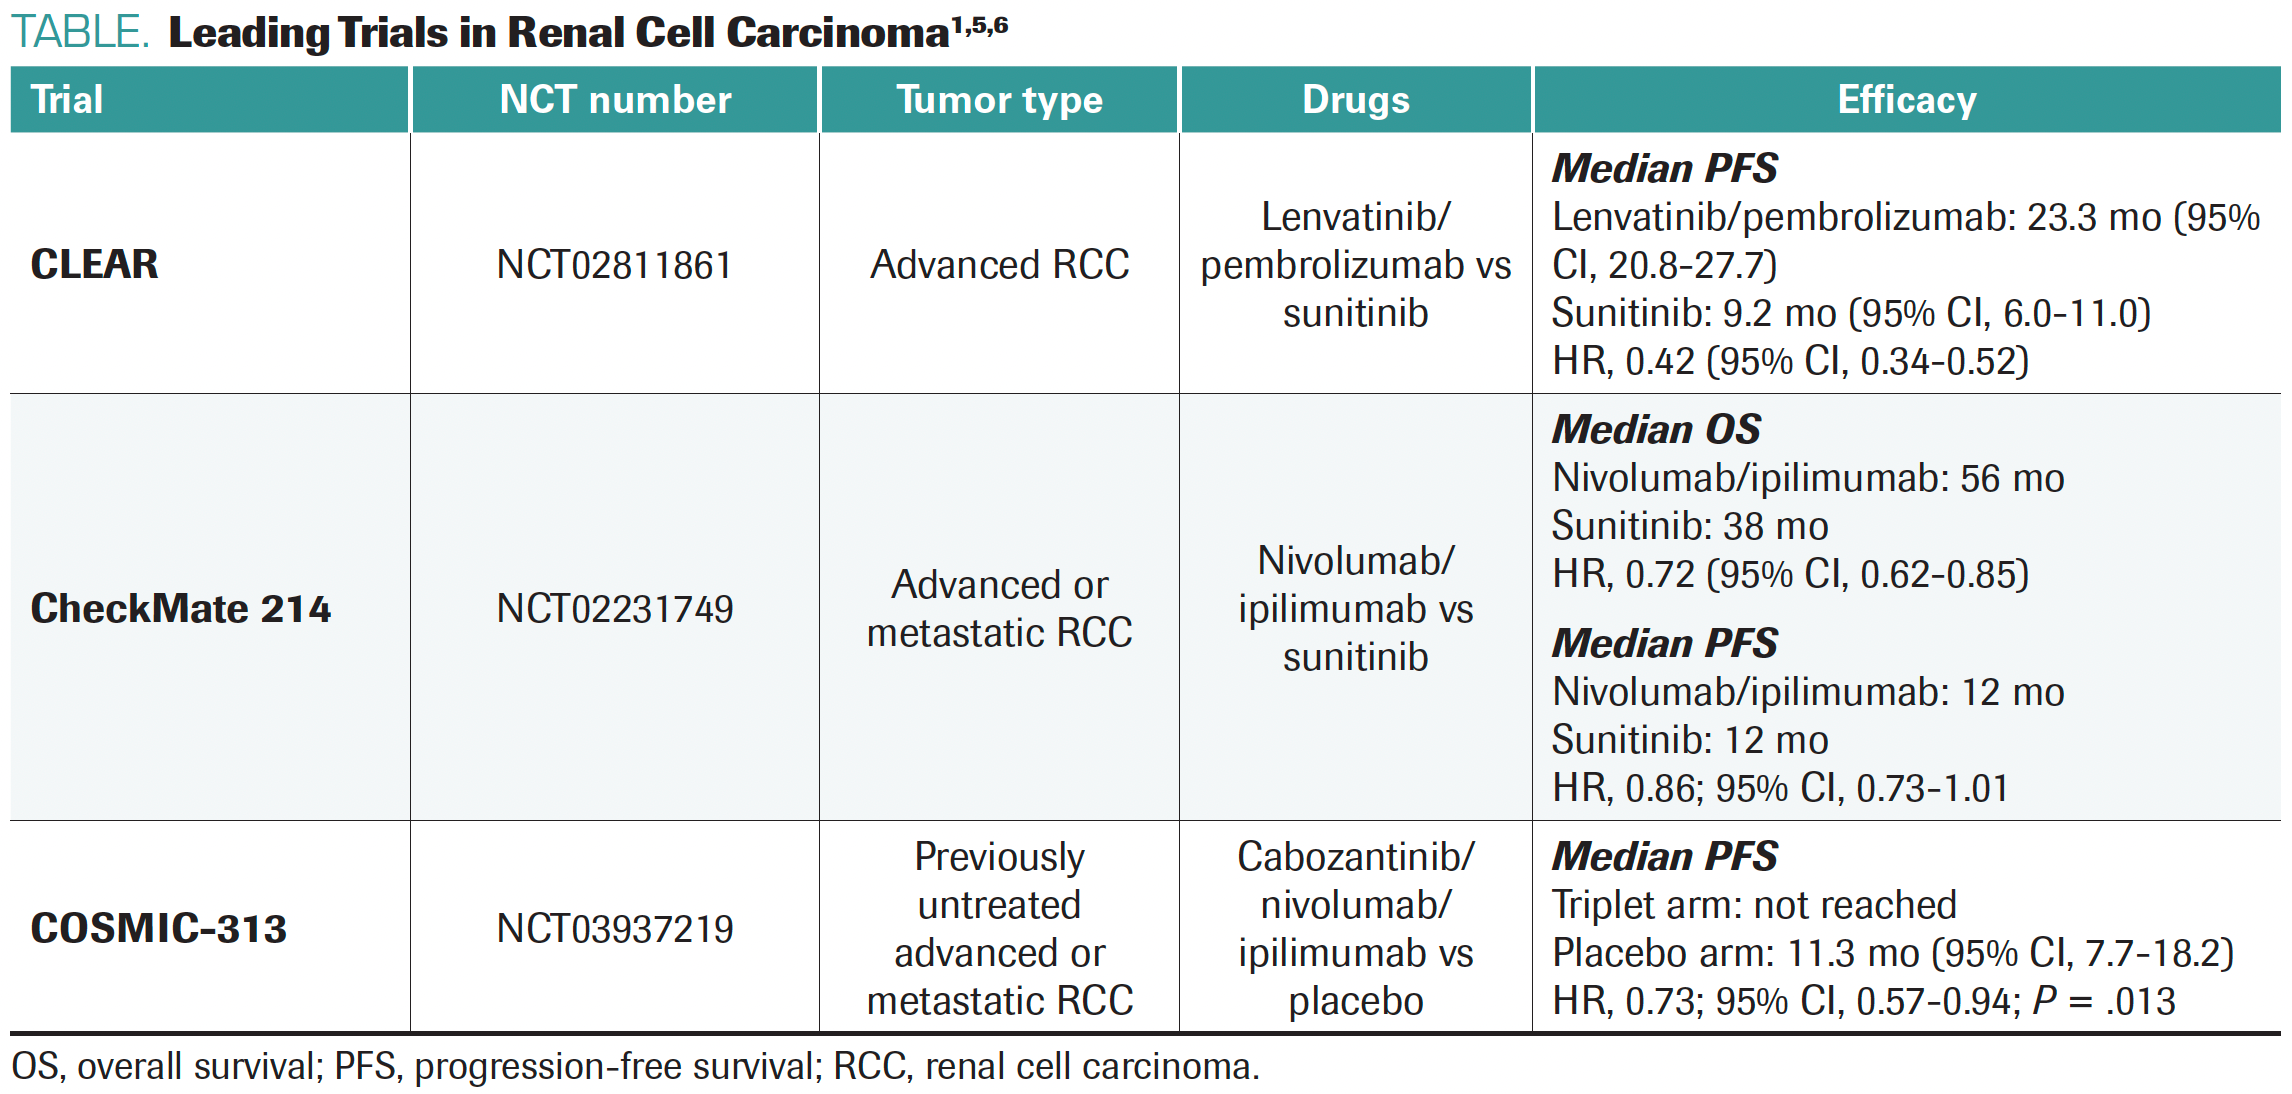 TABLE. Leading Trials in Renal Cell Carcinoma1,5,6